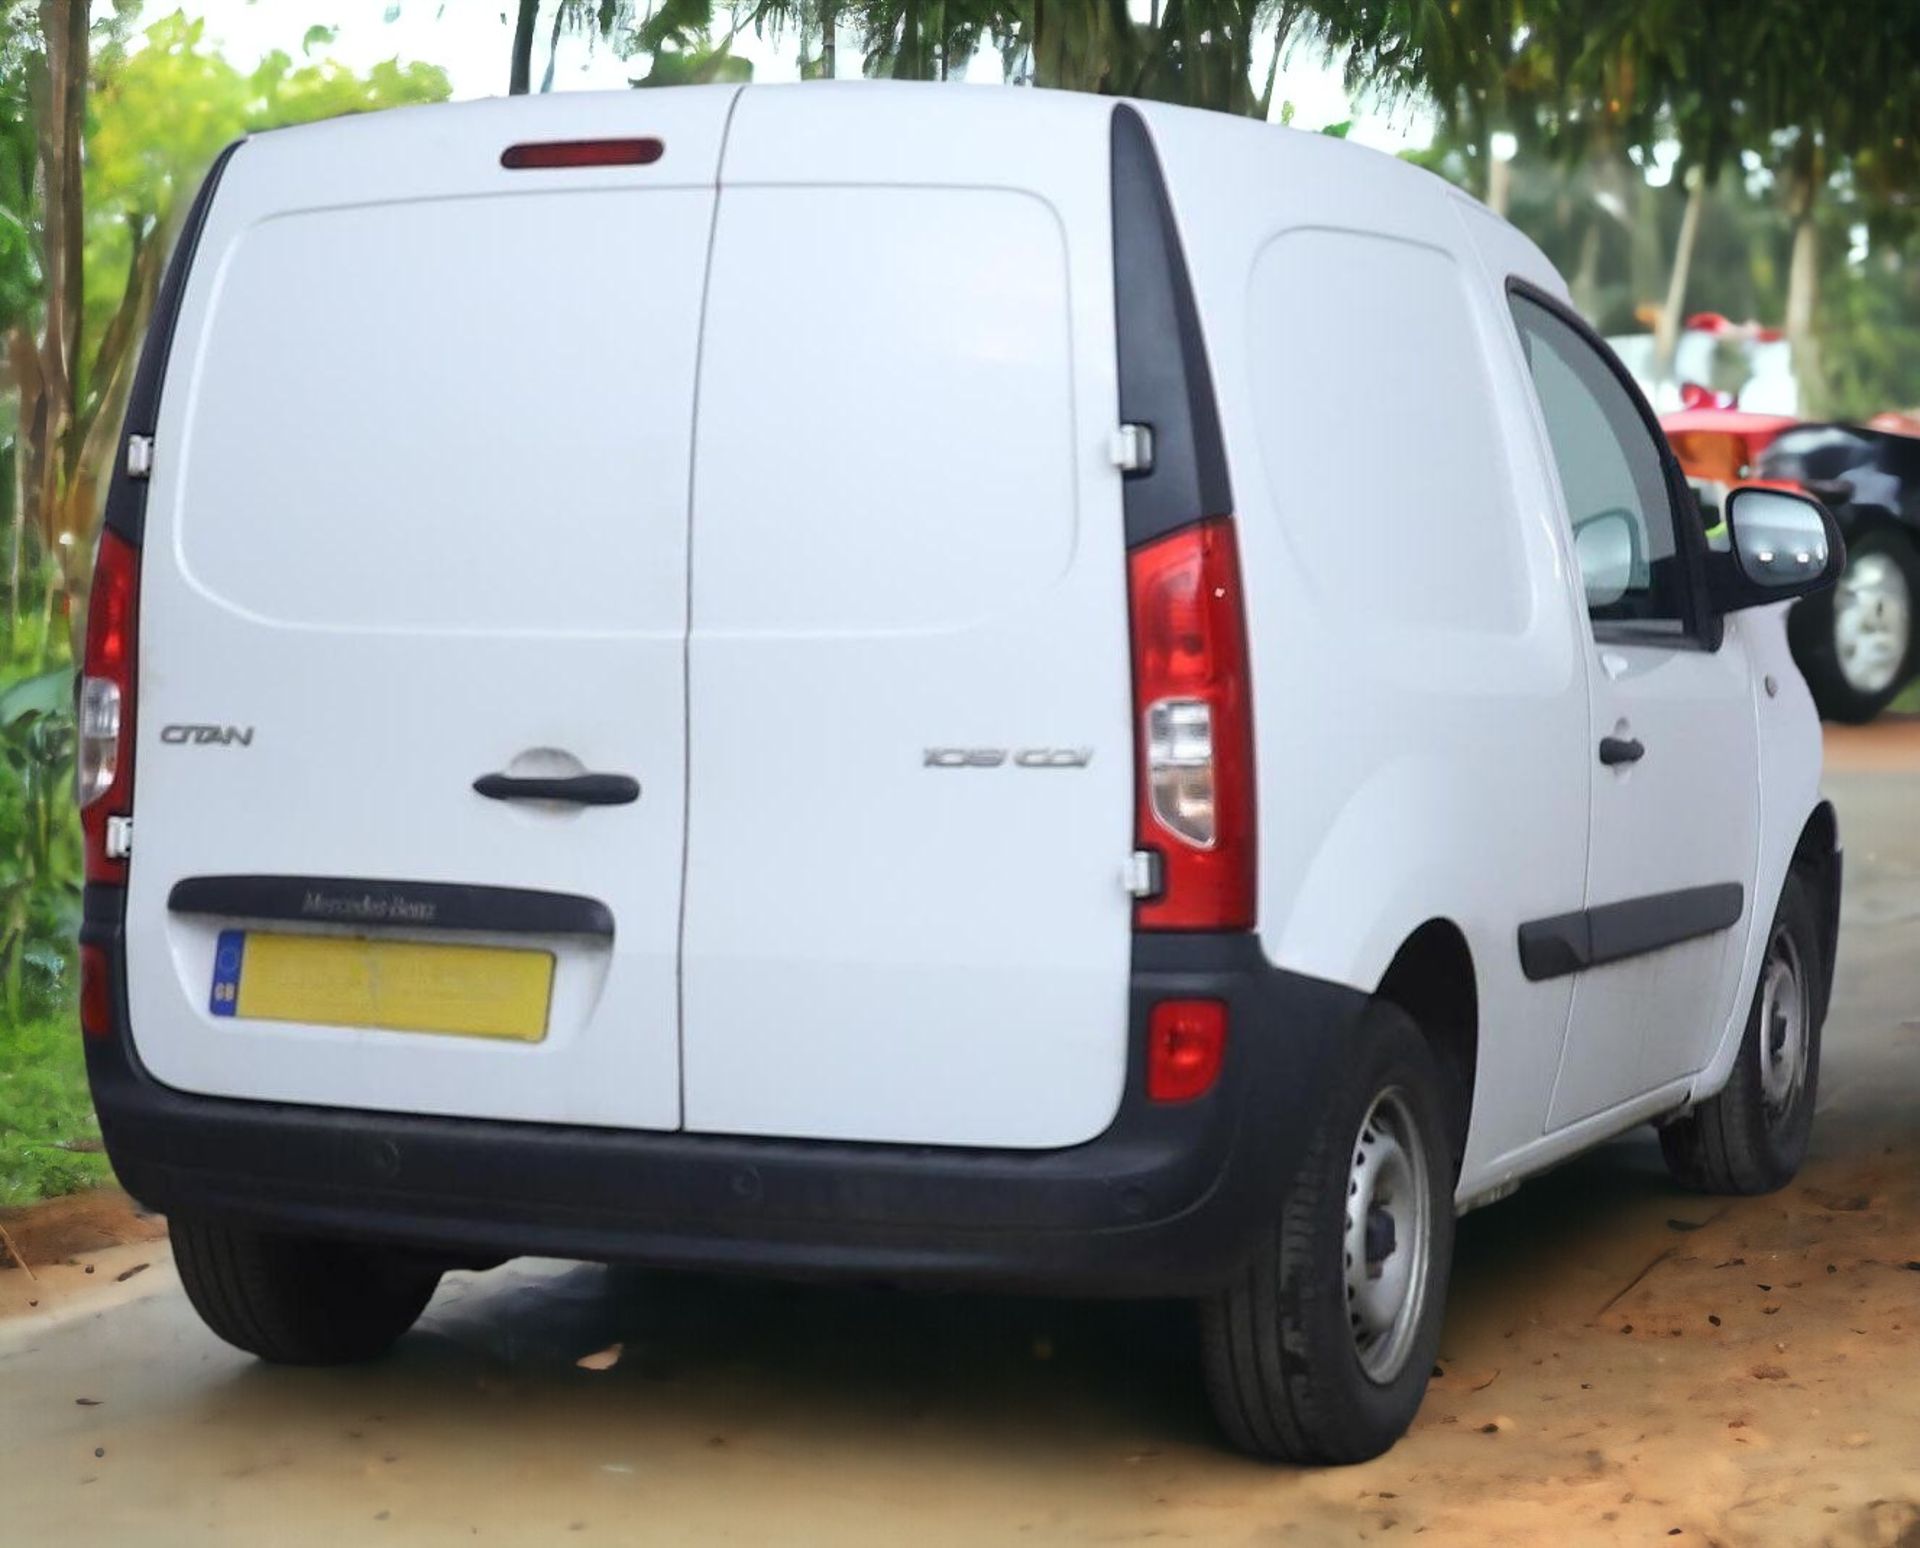 MERCEDES-BENZ CITAN 109CDI COMPACT: COMPACT AND EFFICIENT WORK COMPANION - Image 4 of 11